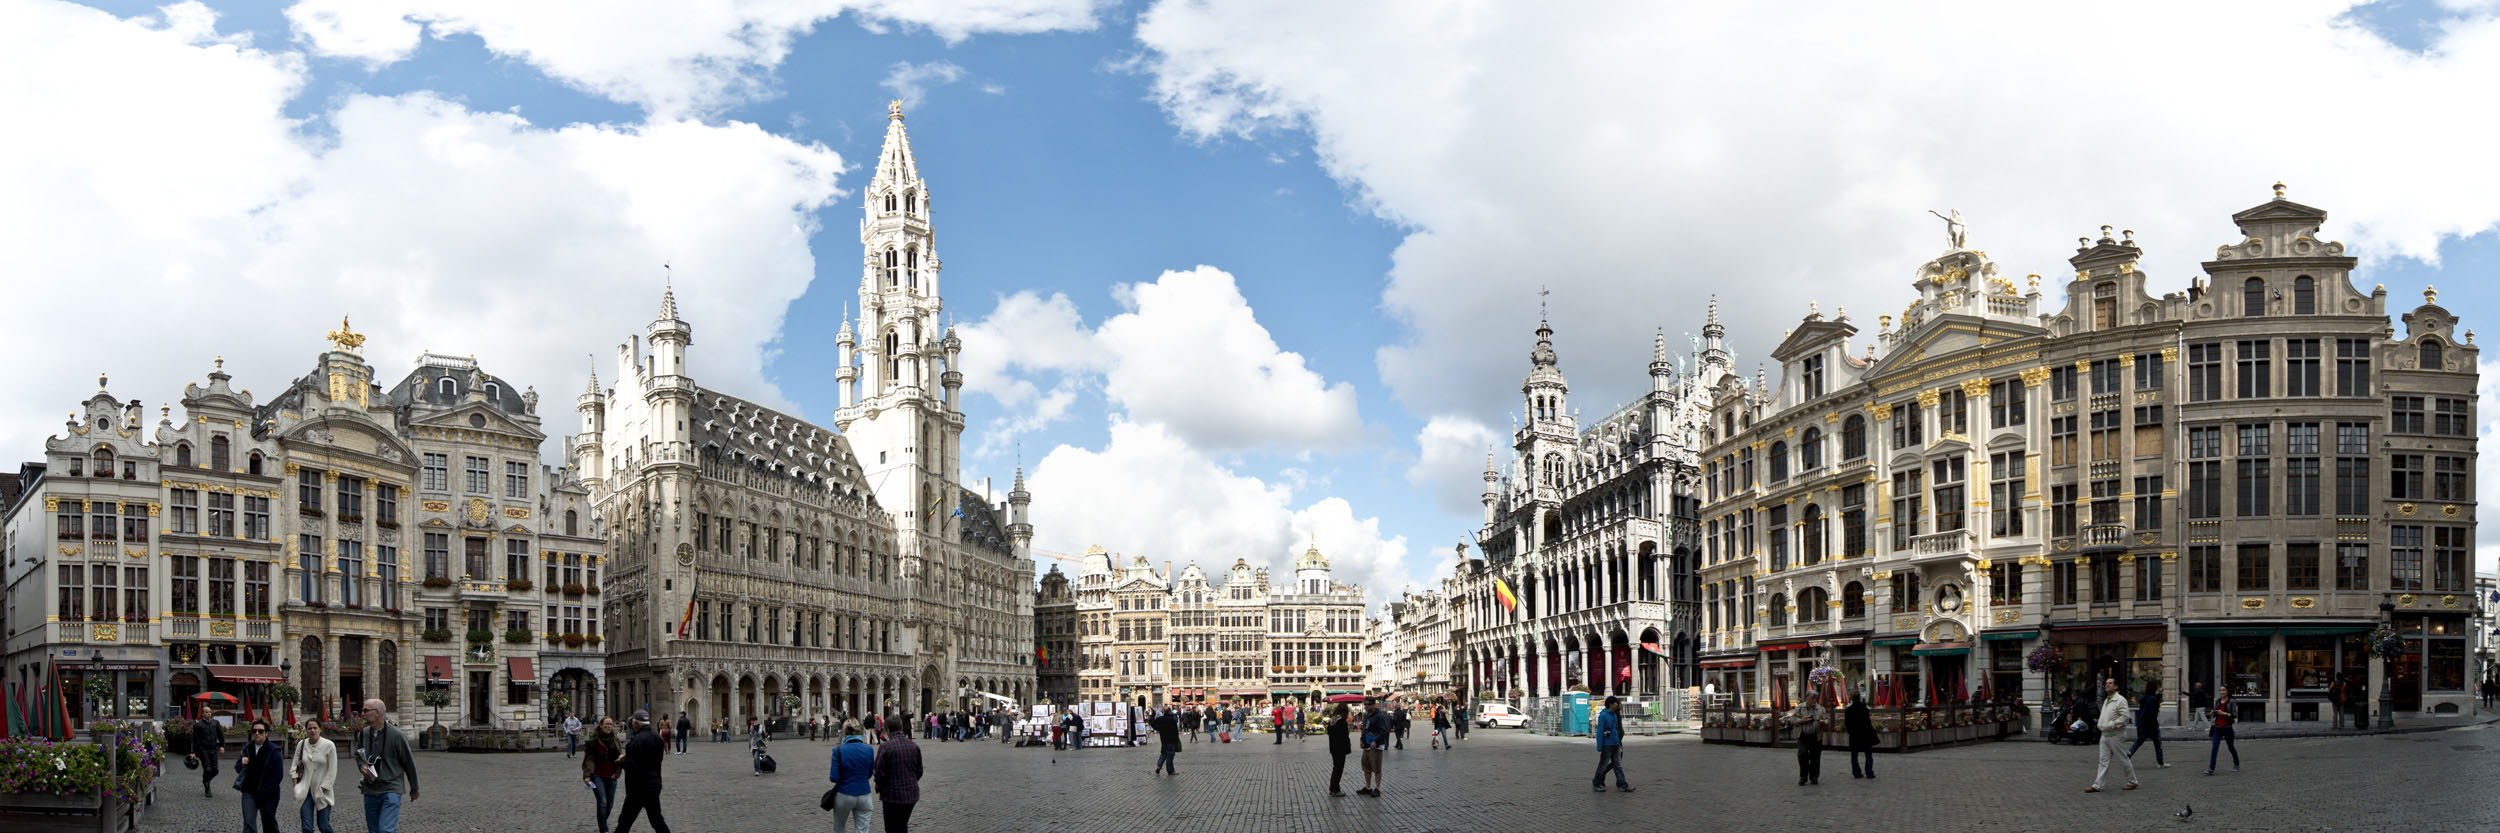 Brussels europe pre wedding photoshoot dreamwedding boutique singapore bridal package and wedding gown rental belgium grand place 1